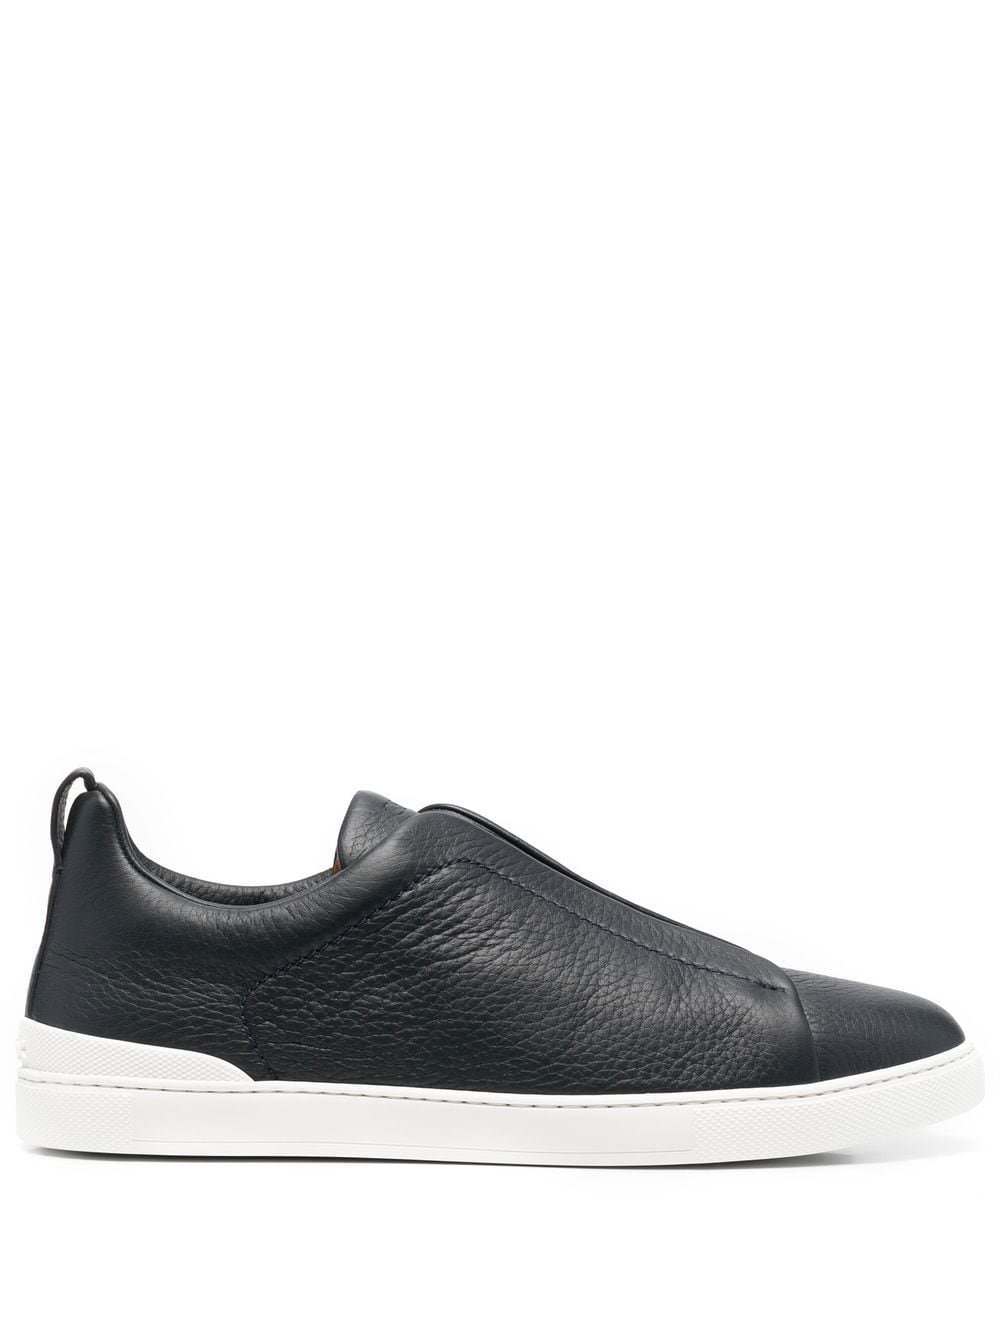 Zegna slip-on Leather Sneakers - Farfetch